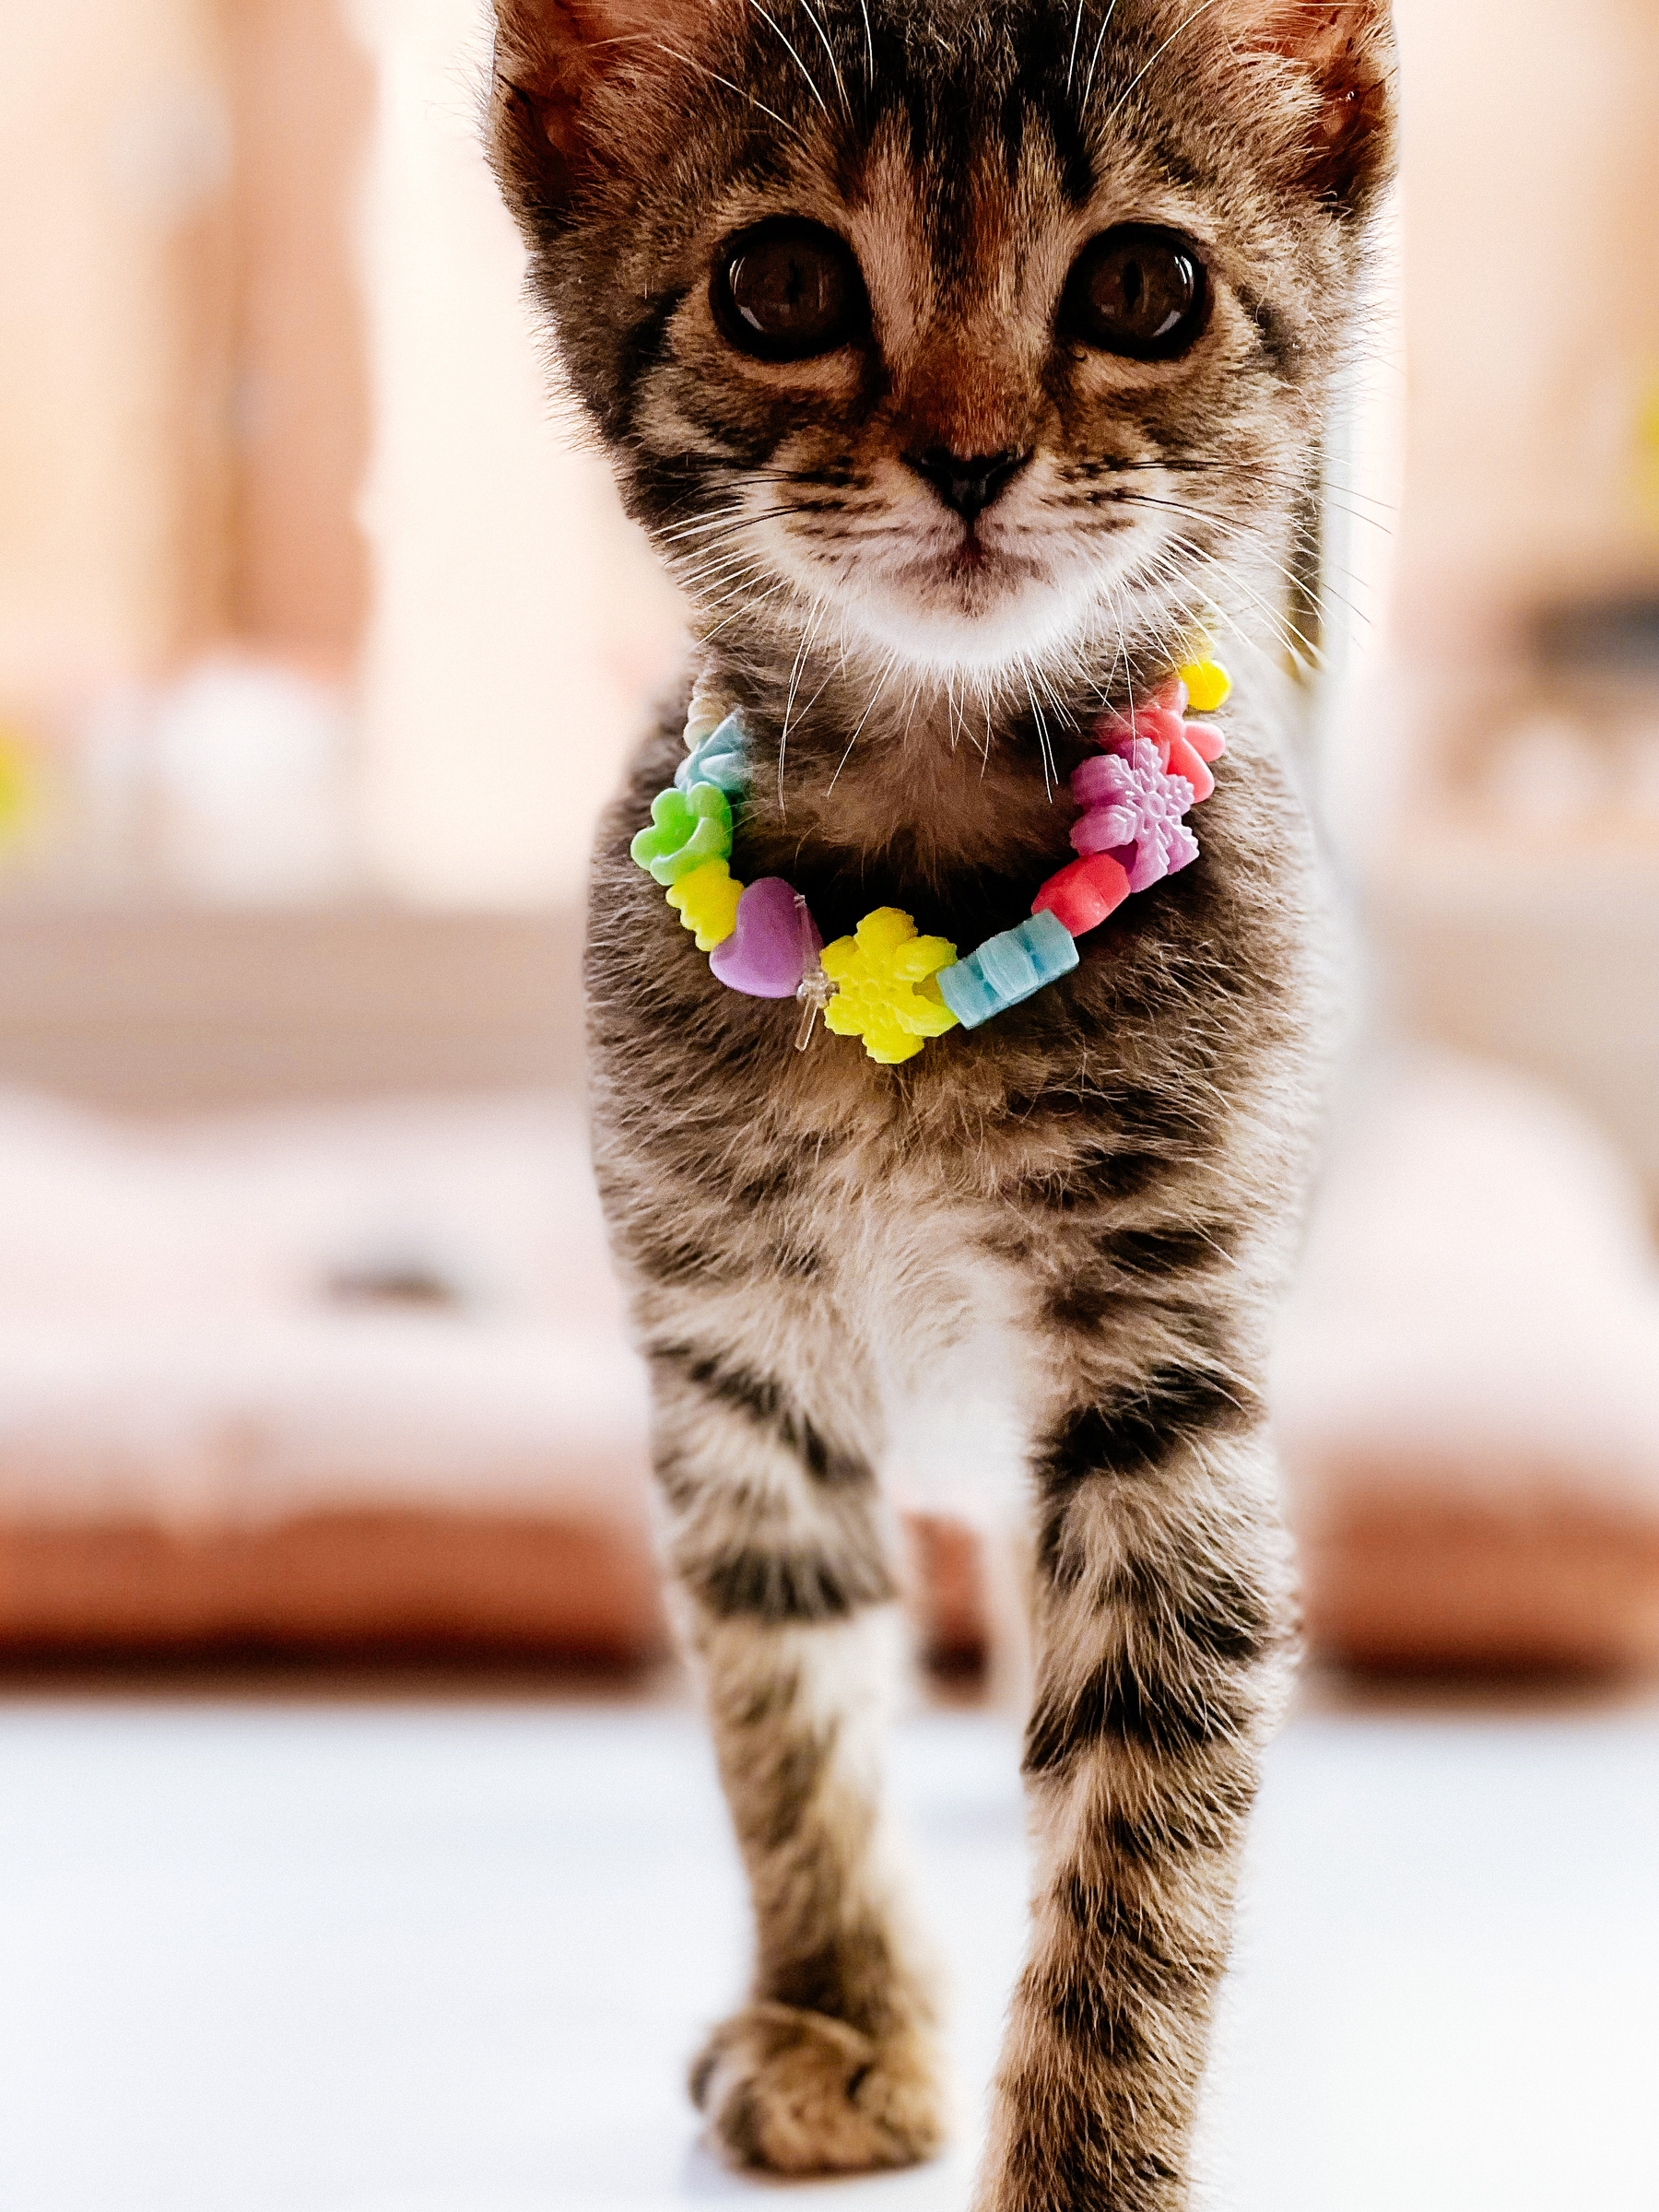 A kitten with a necklace